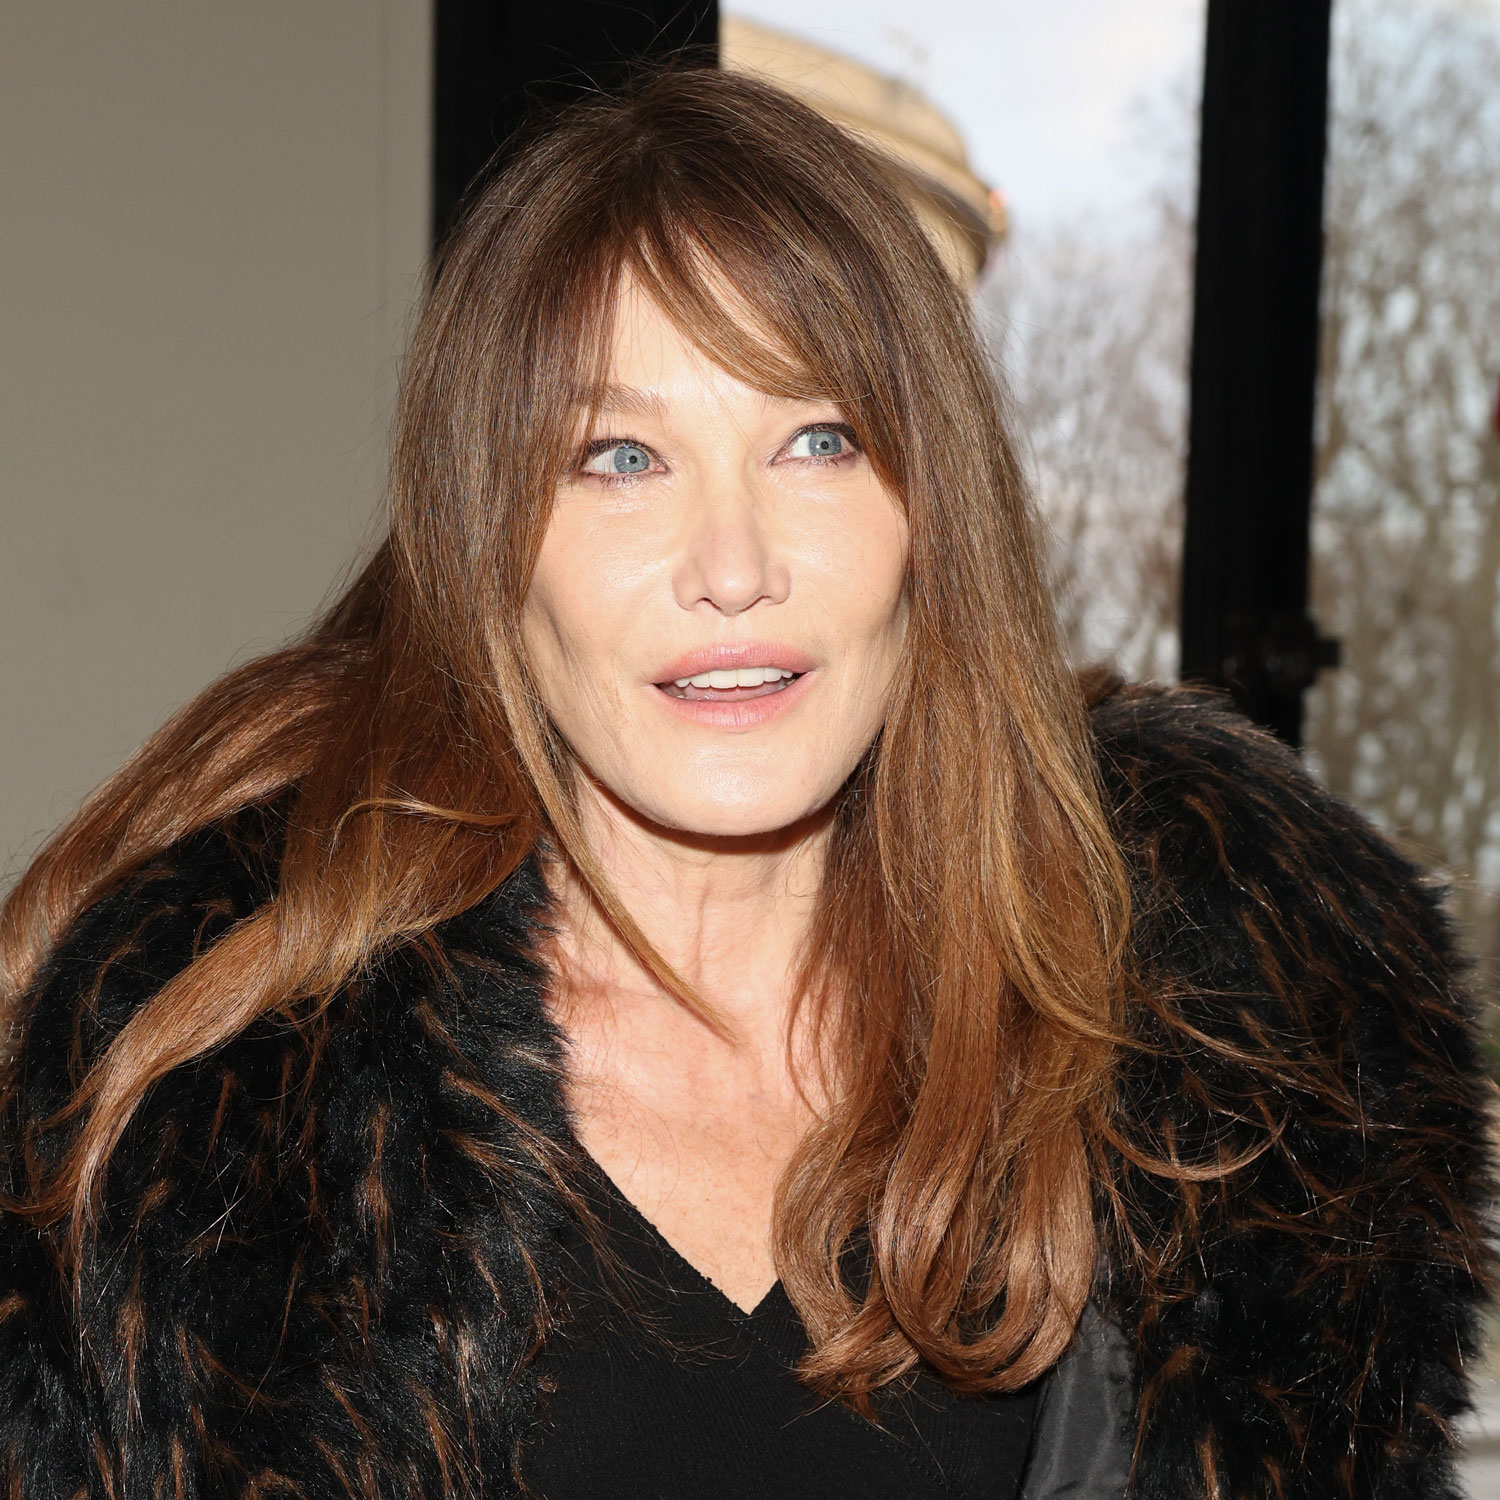 Carla Bruni Just Traveled in a Quintessentially French Airport Outfit